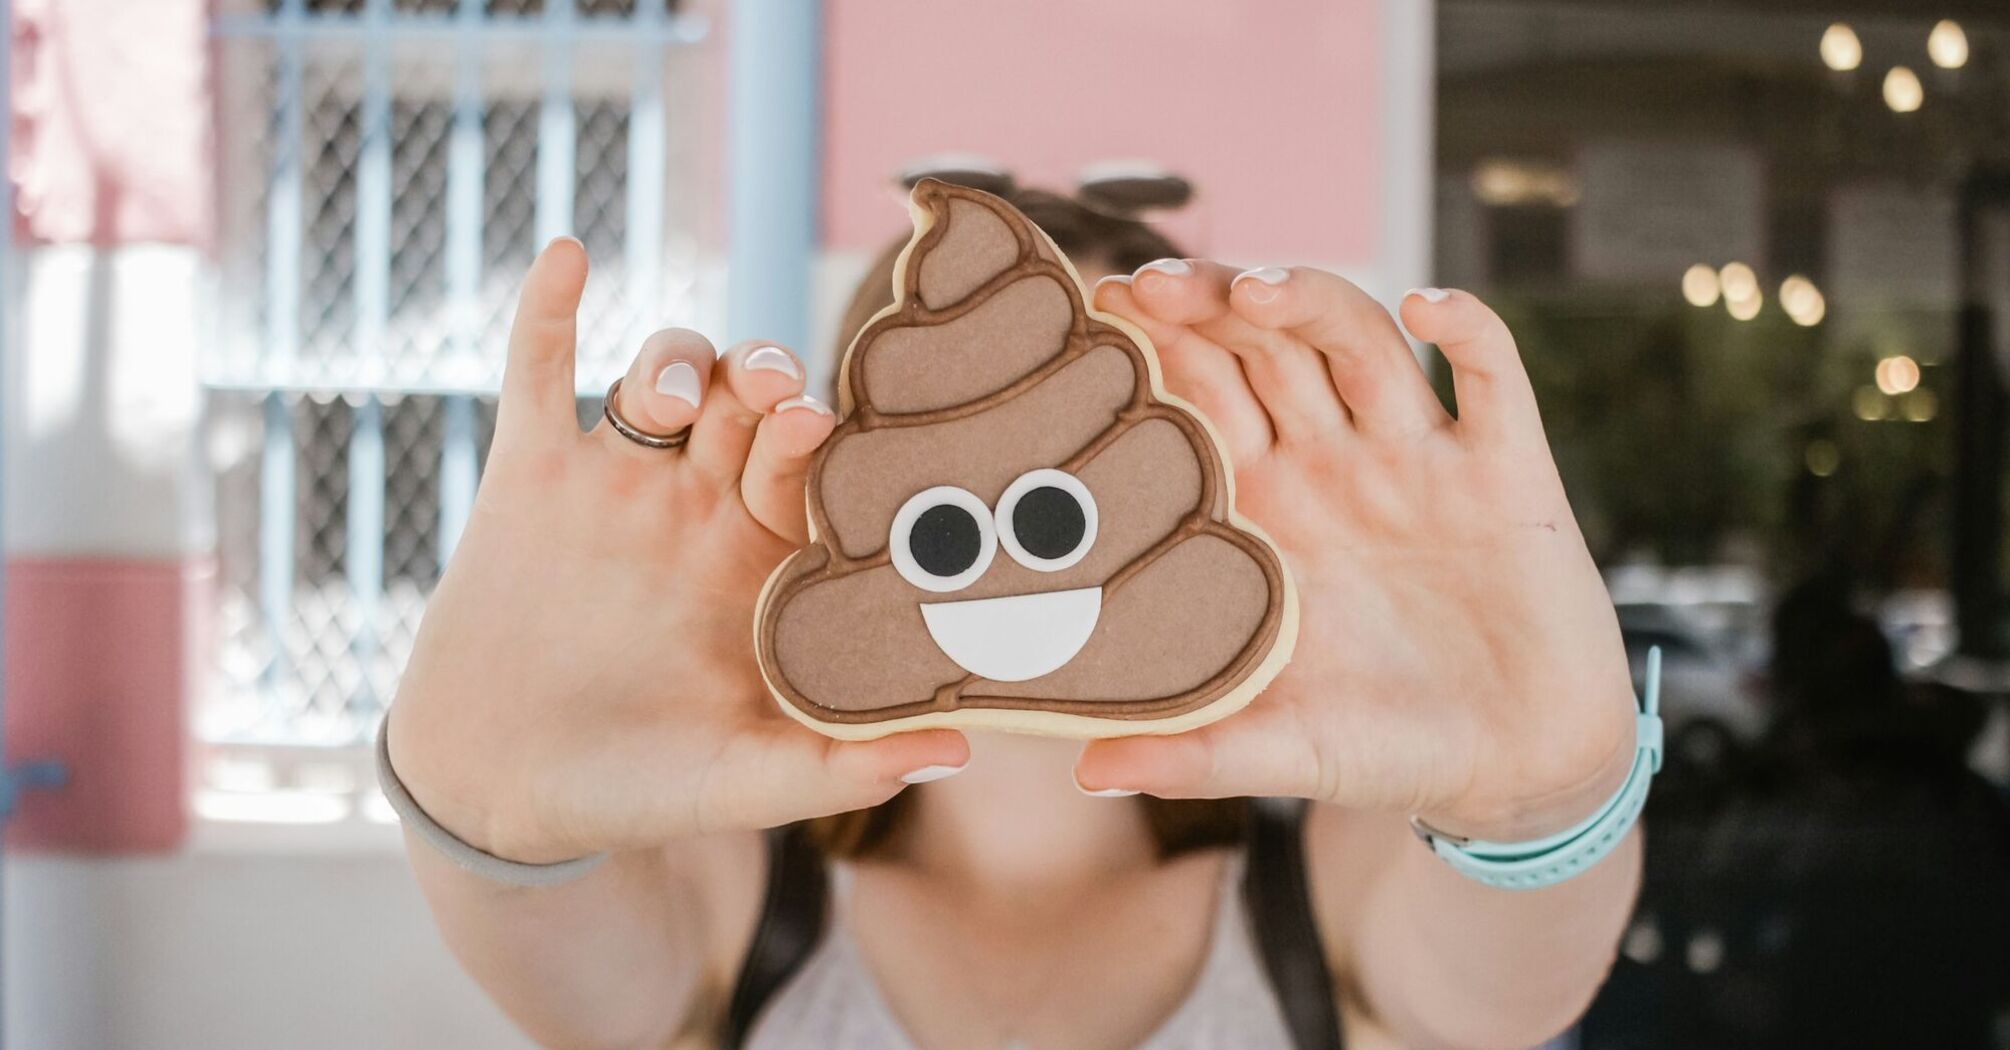 Person holding a cookie shaped like the poop emoji